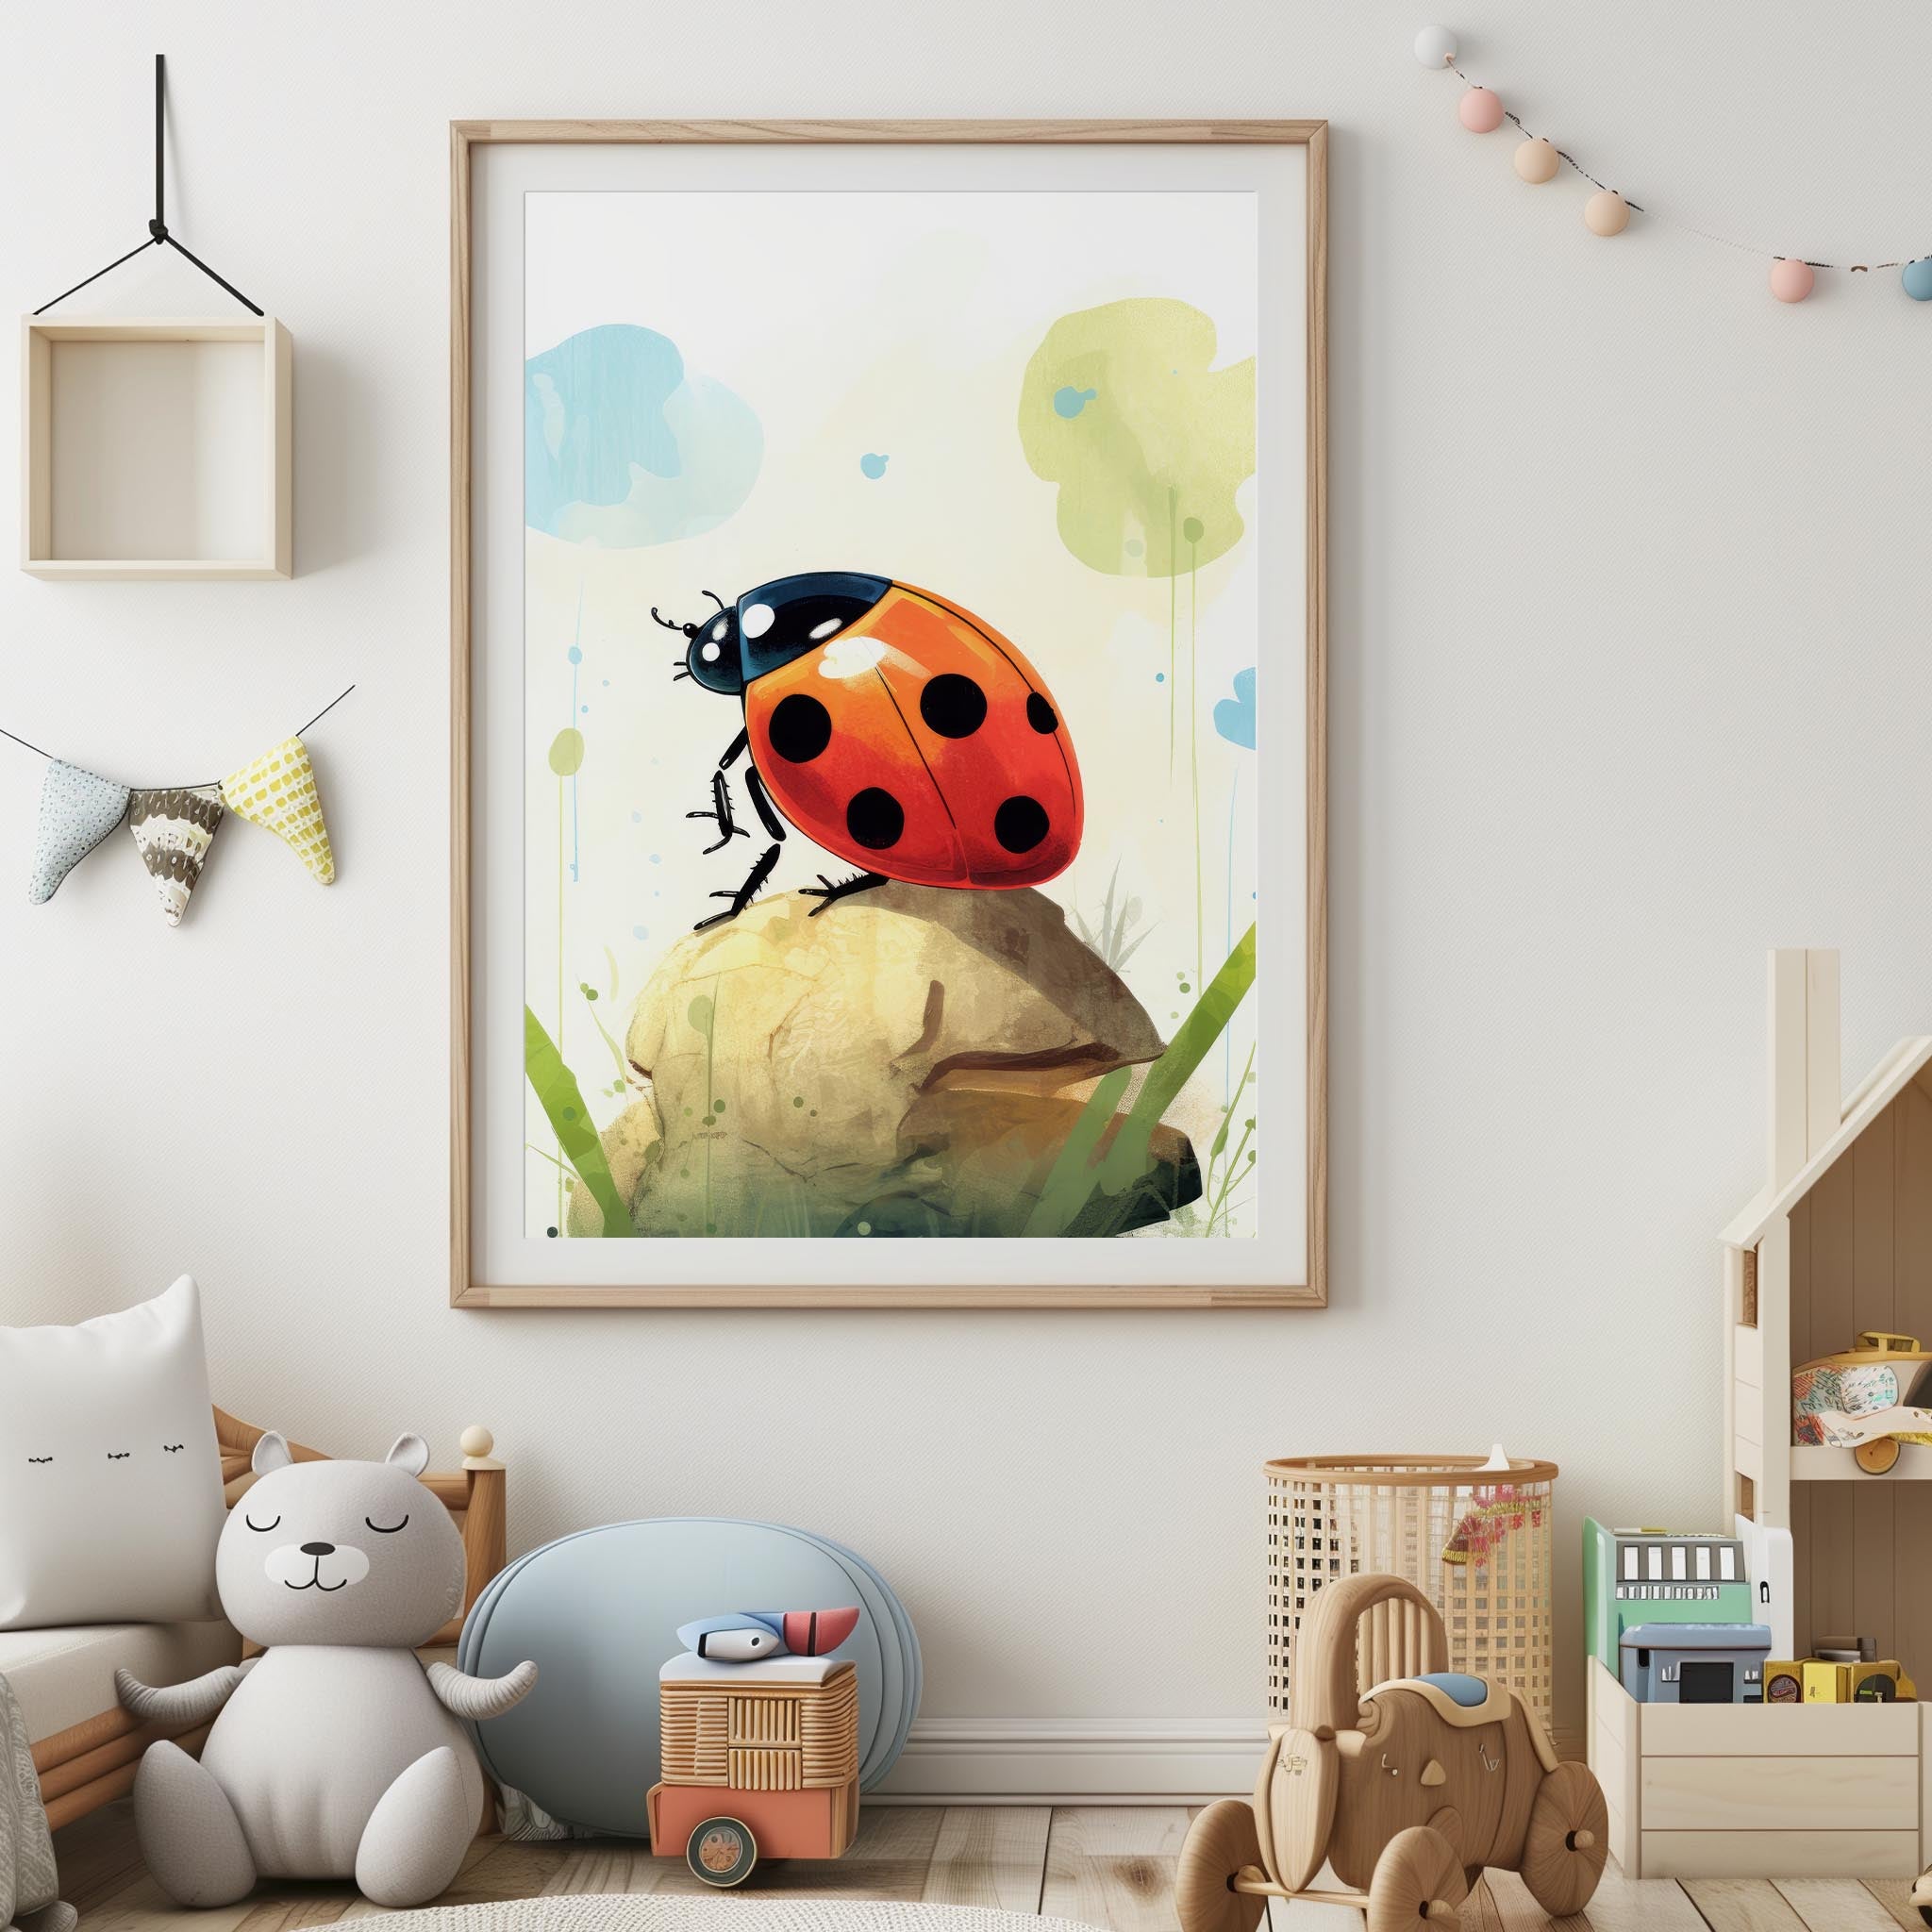 Colorful insects - 9 printable image templates